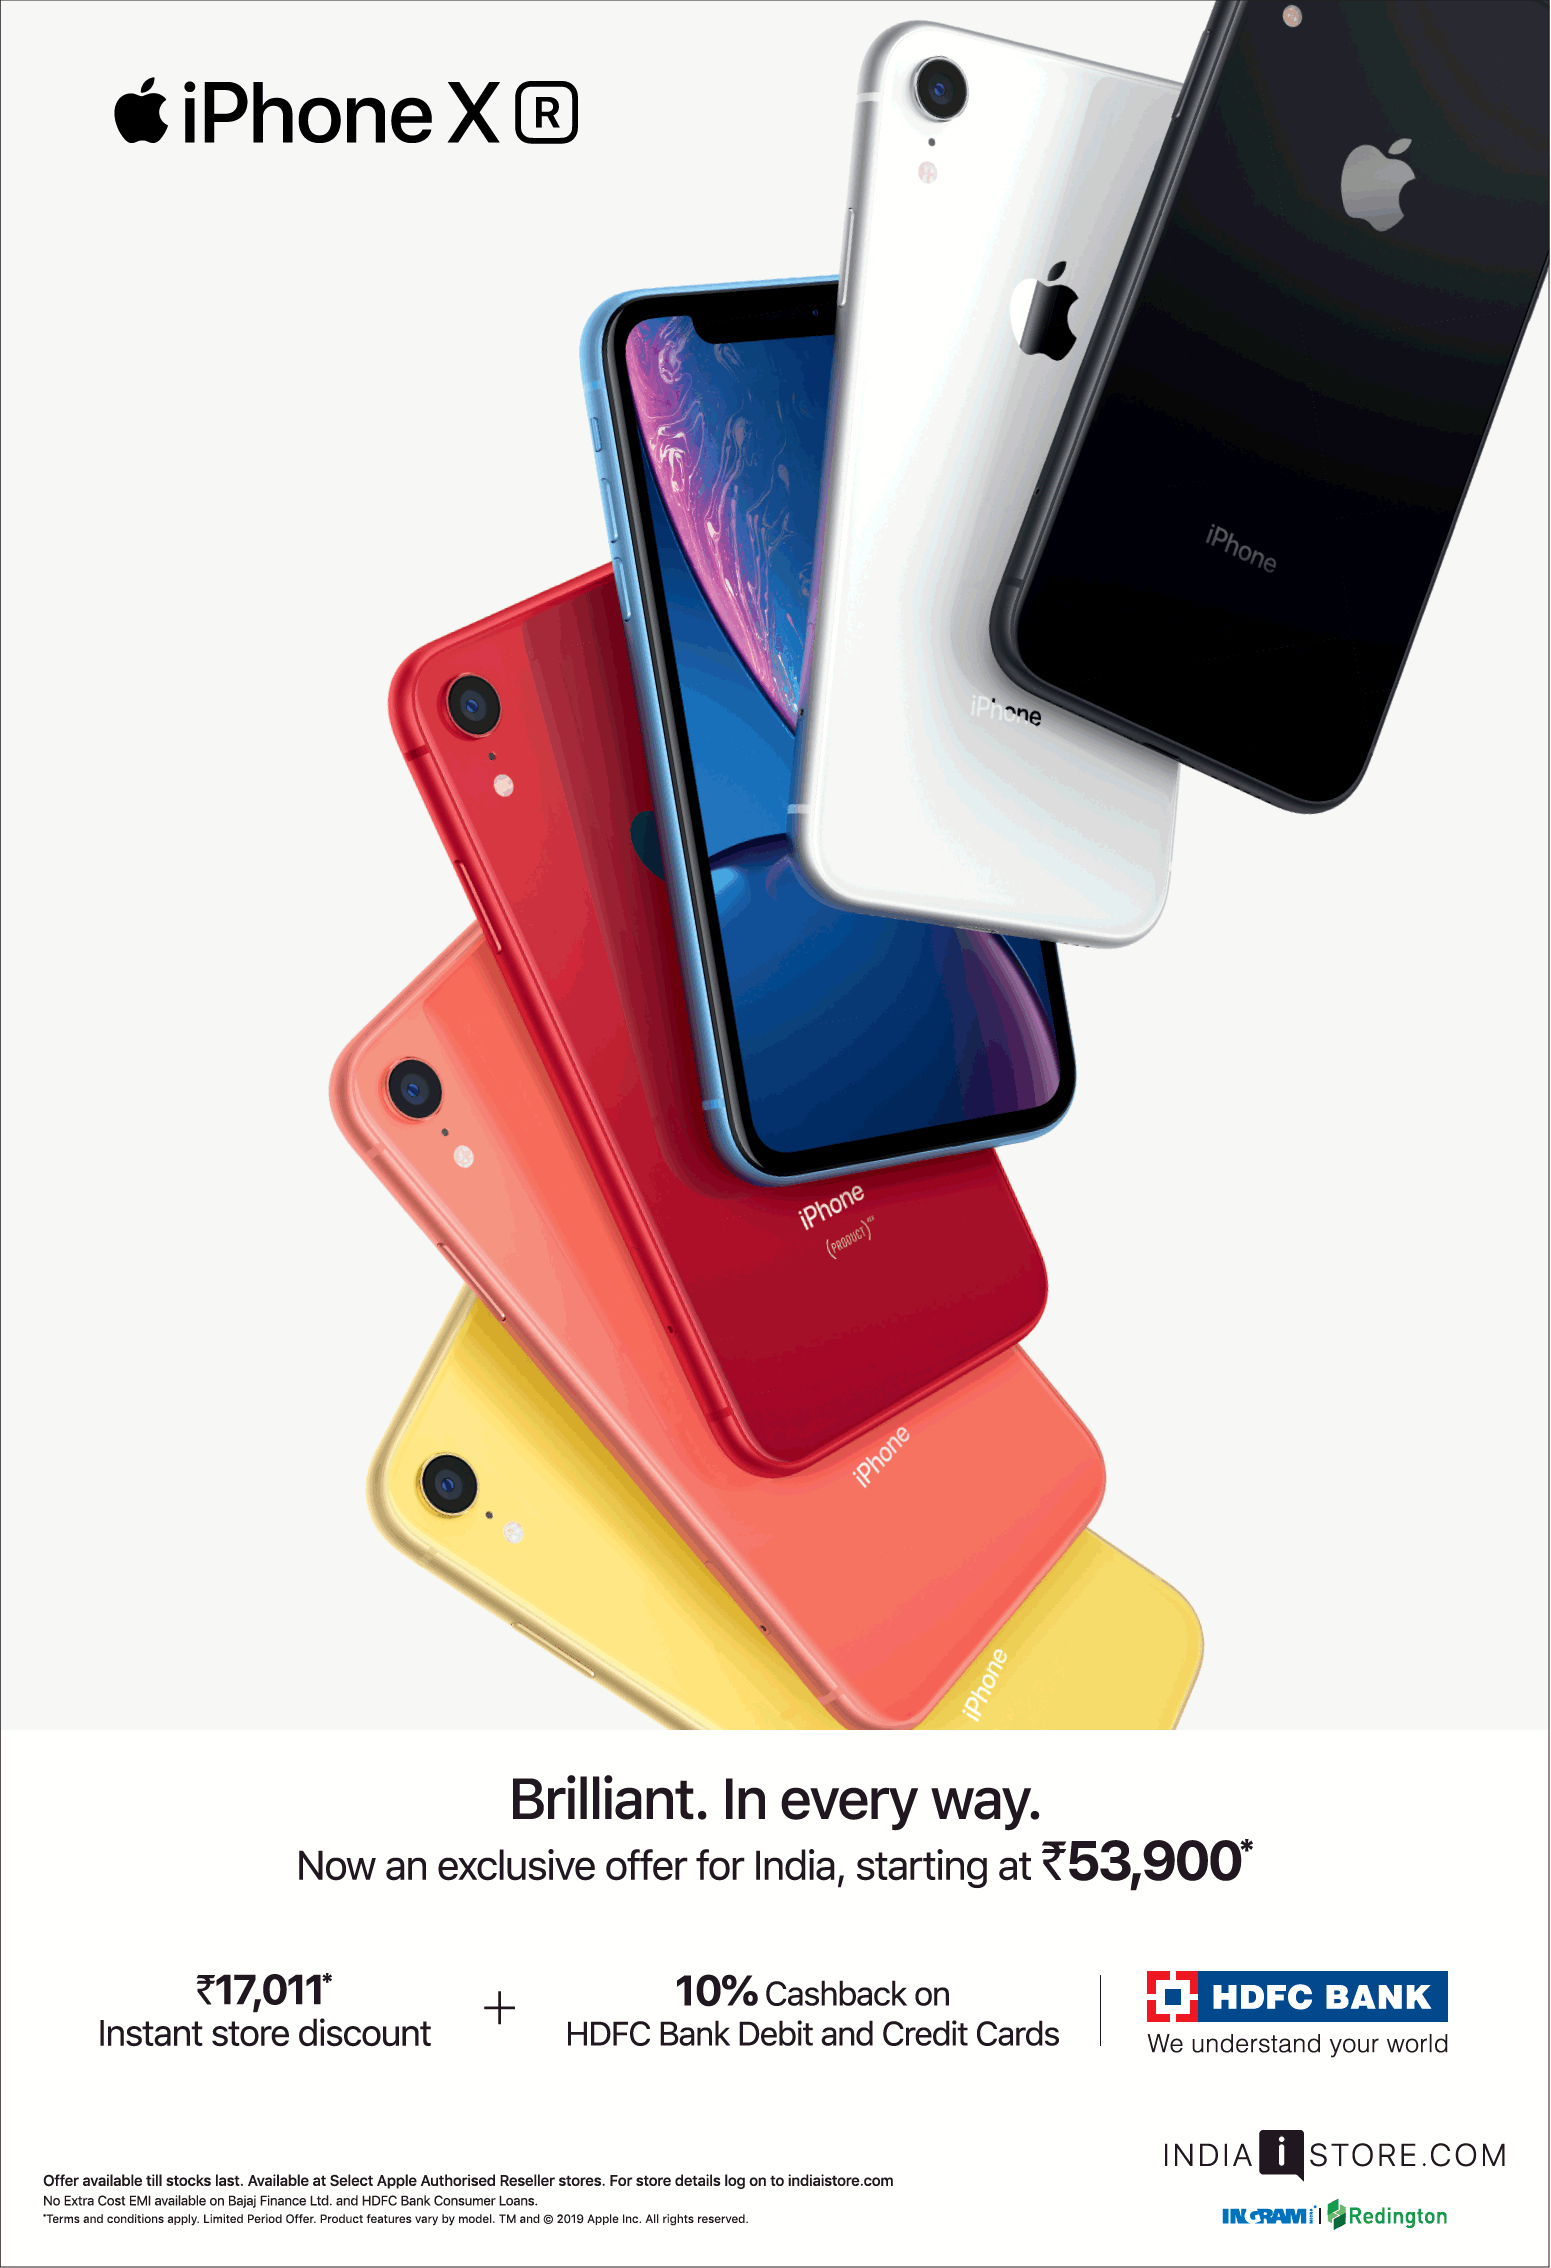 iphone-x-r-brilliant-in-every-way-starting-at-rs-53900-ad-times-of-india-delhi-27-04-2019.png